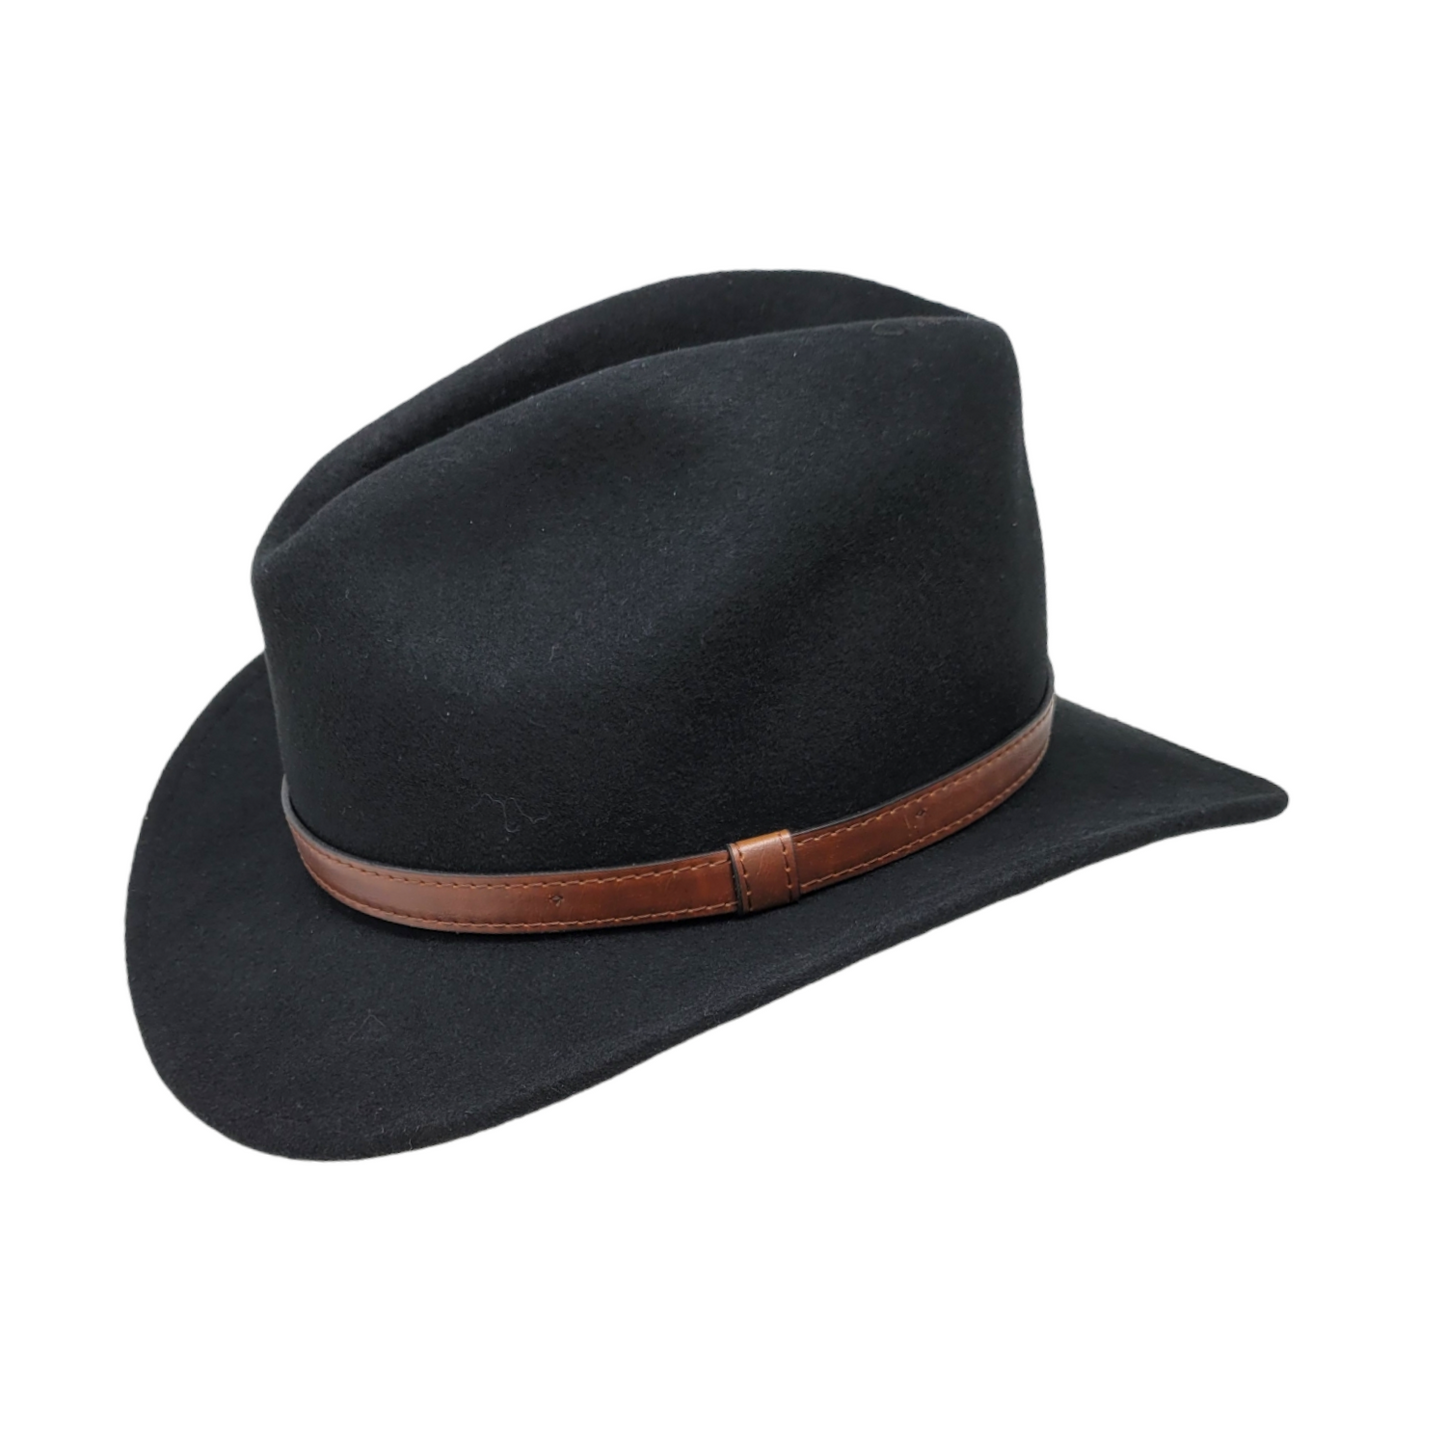 Epoch Men's Premium Wool Outback Fedora with Leather Band Hat